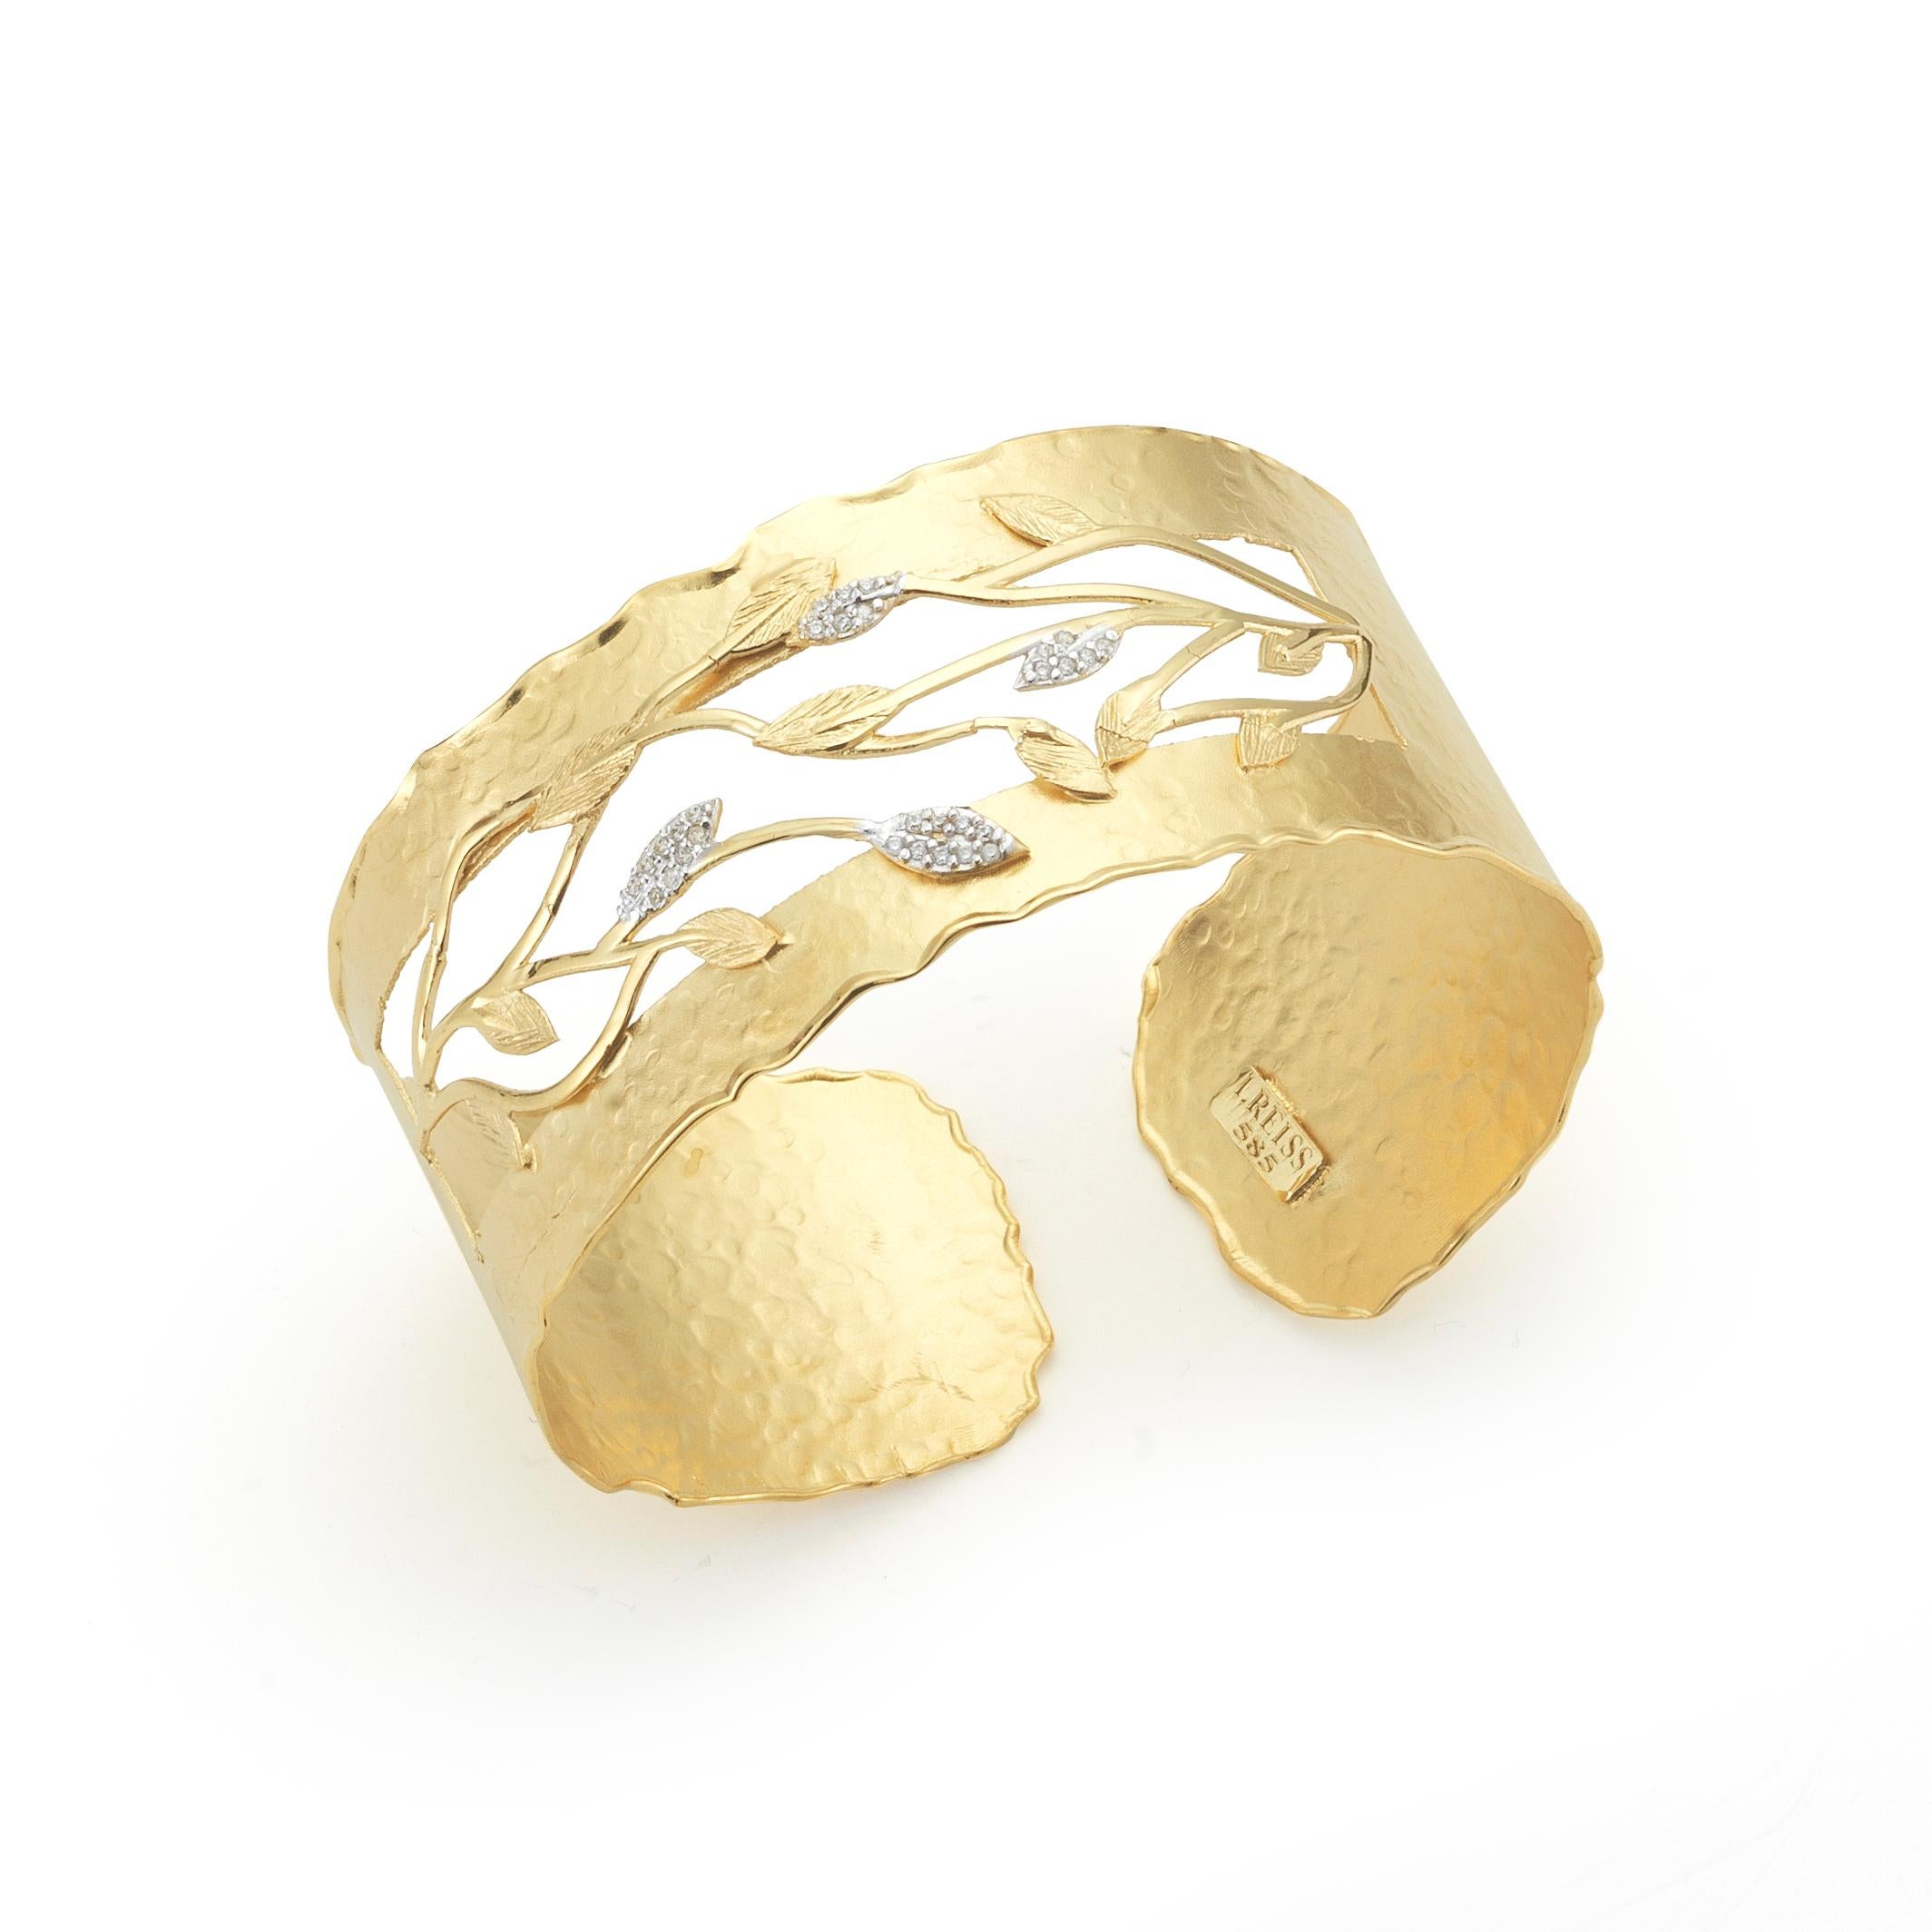 14 Karat Yellow Gold Hand-Crafted Scallop-Edged Matte and Hammer-Finished Vine Leaf Open Cuff Bracelet, Enhanced with 0.18 Carats of Textured Diamond Leaves.
